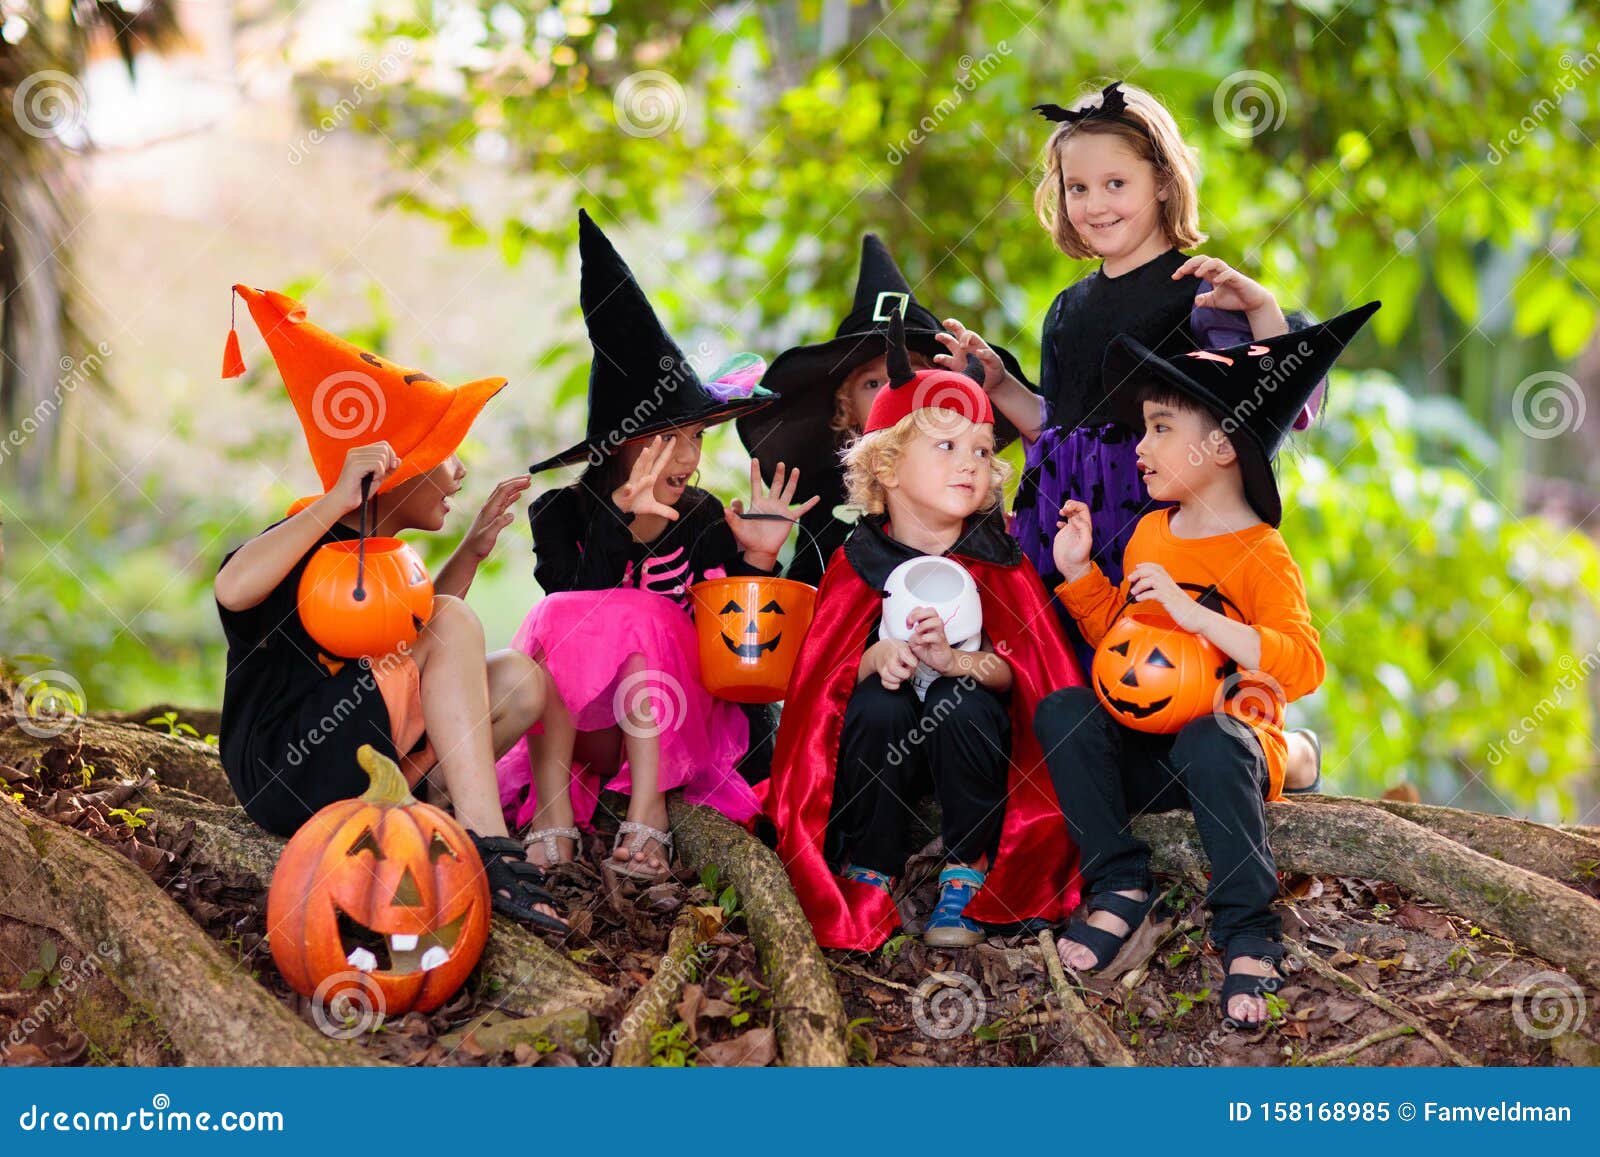 Kids Trick or Treat. Halloween Fun for Children Stock Image - Image of ...